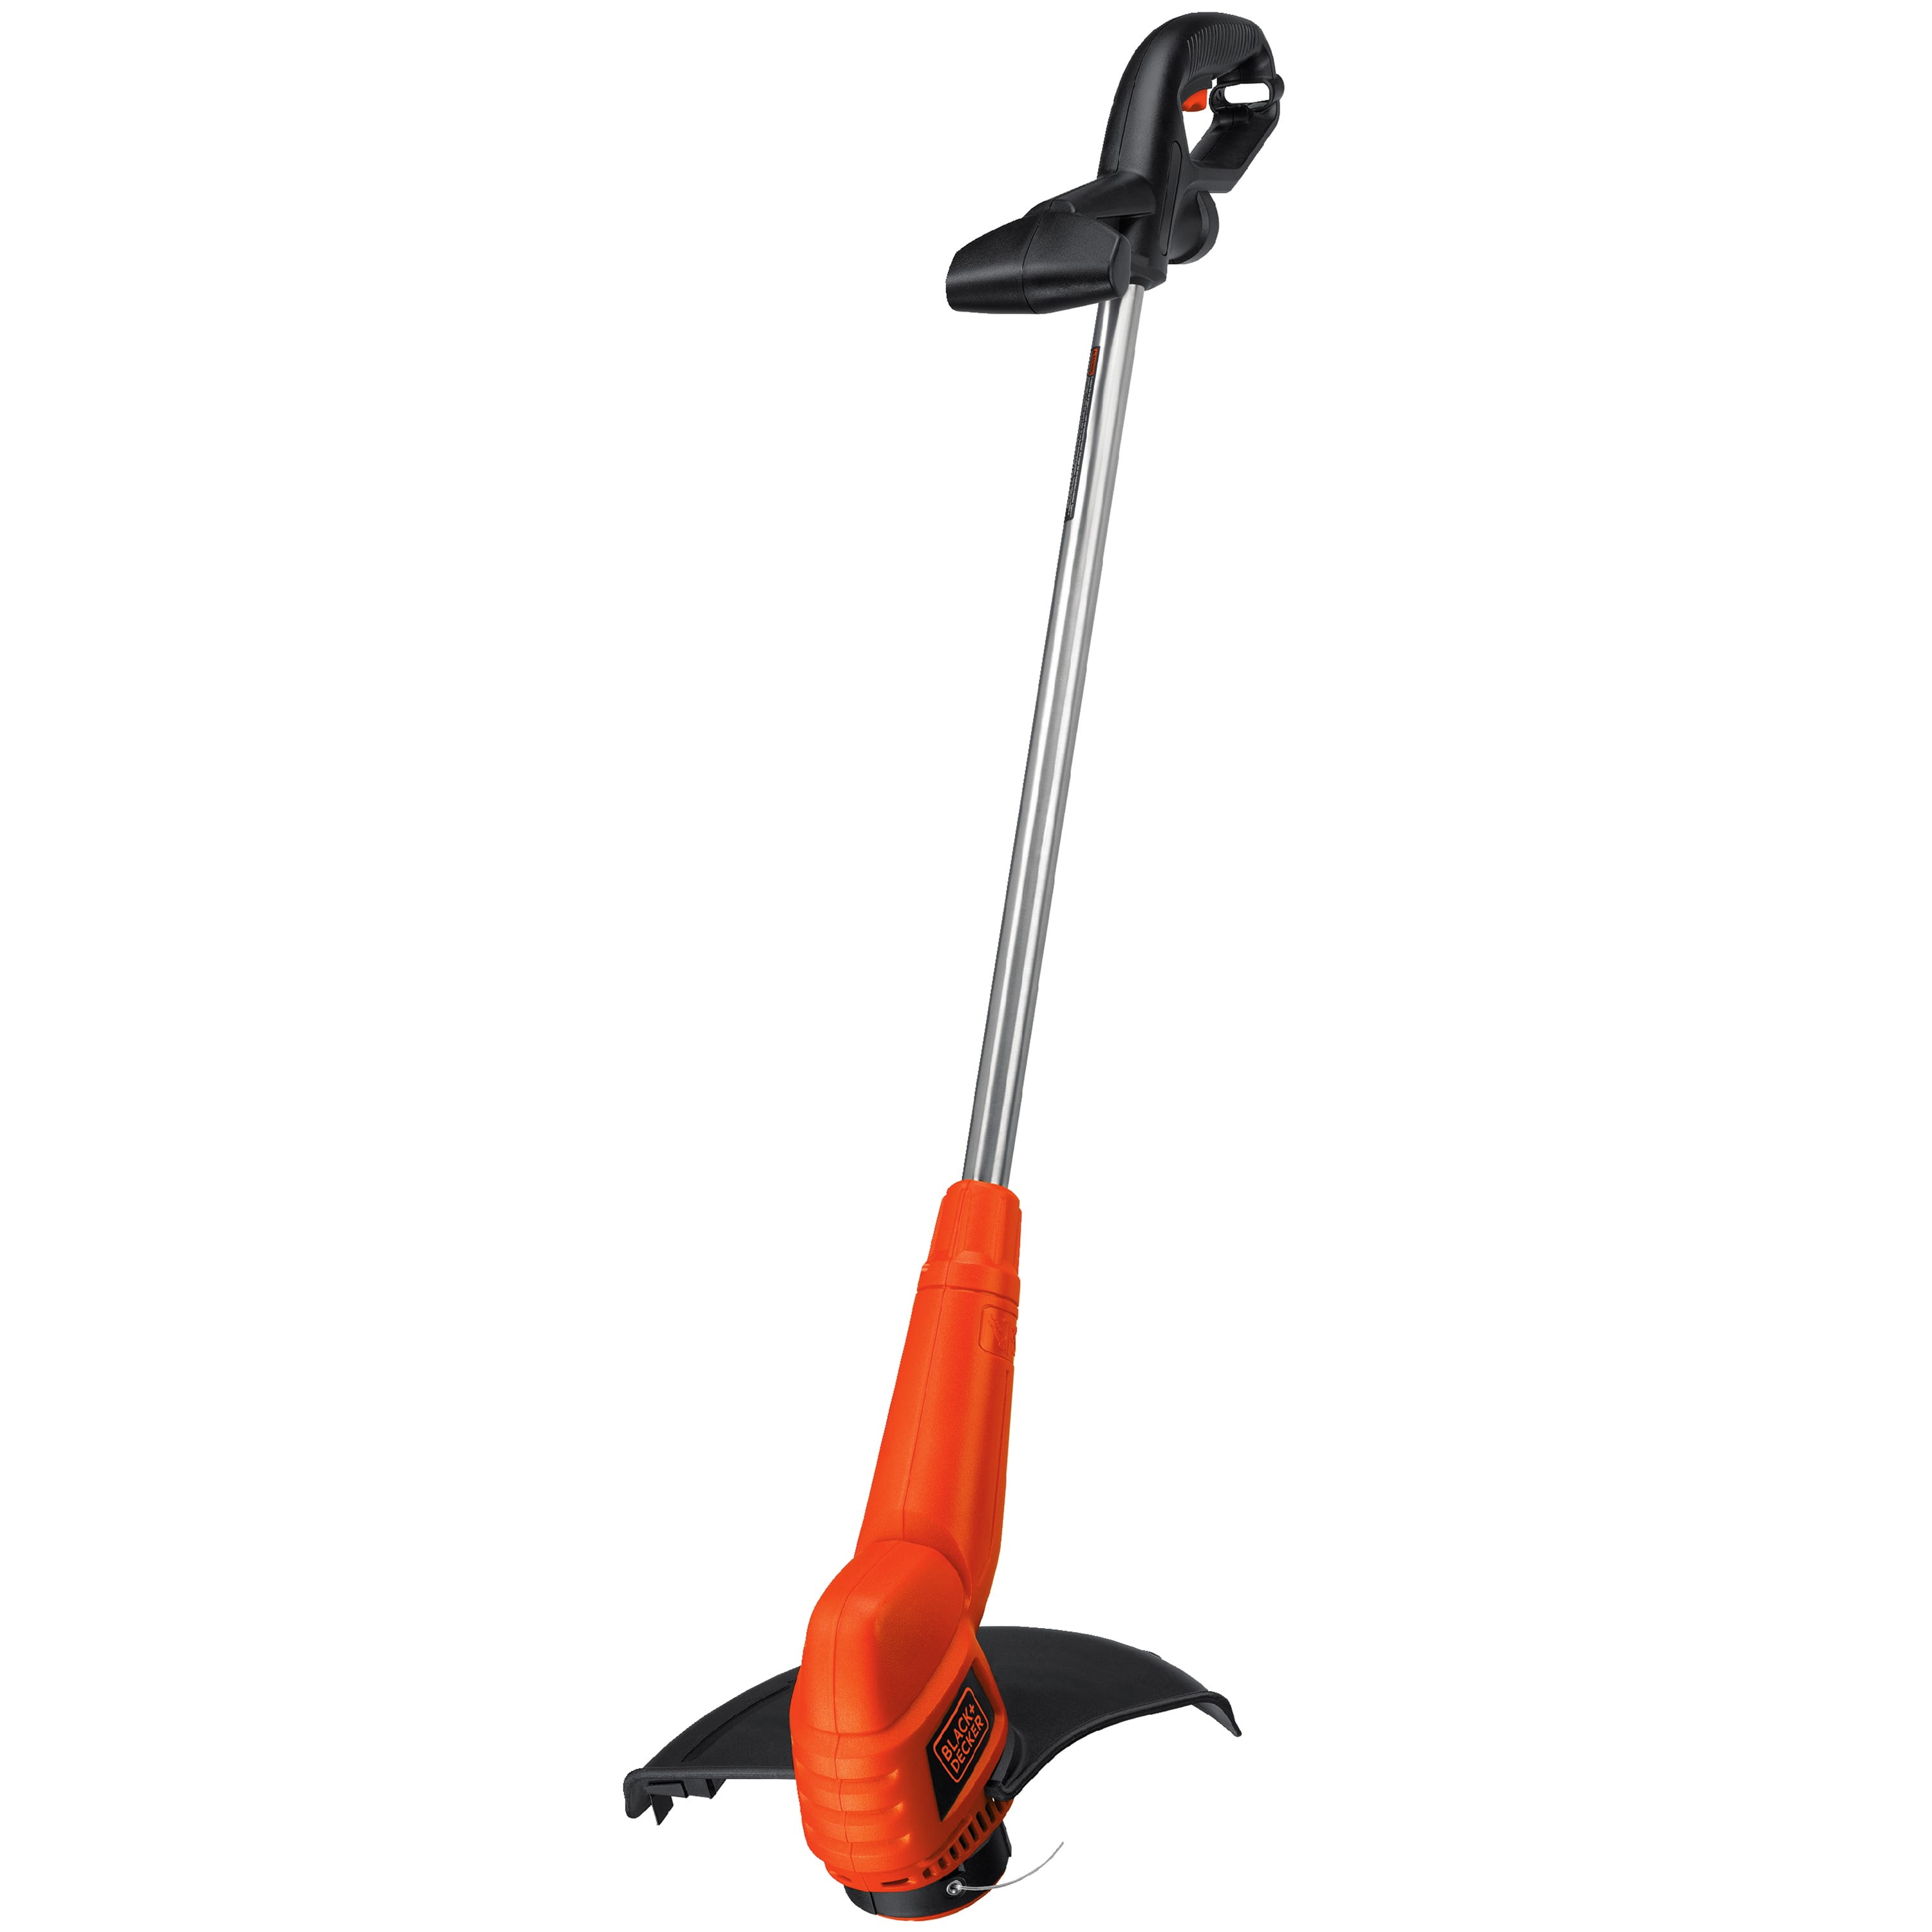 black and decker lawn trimmer